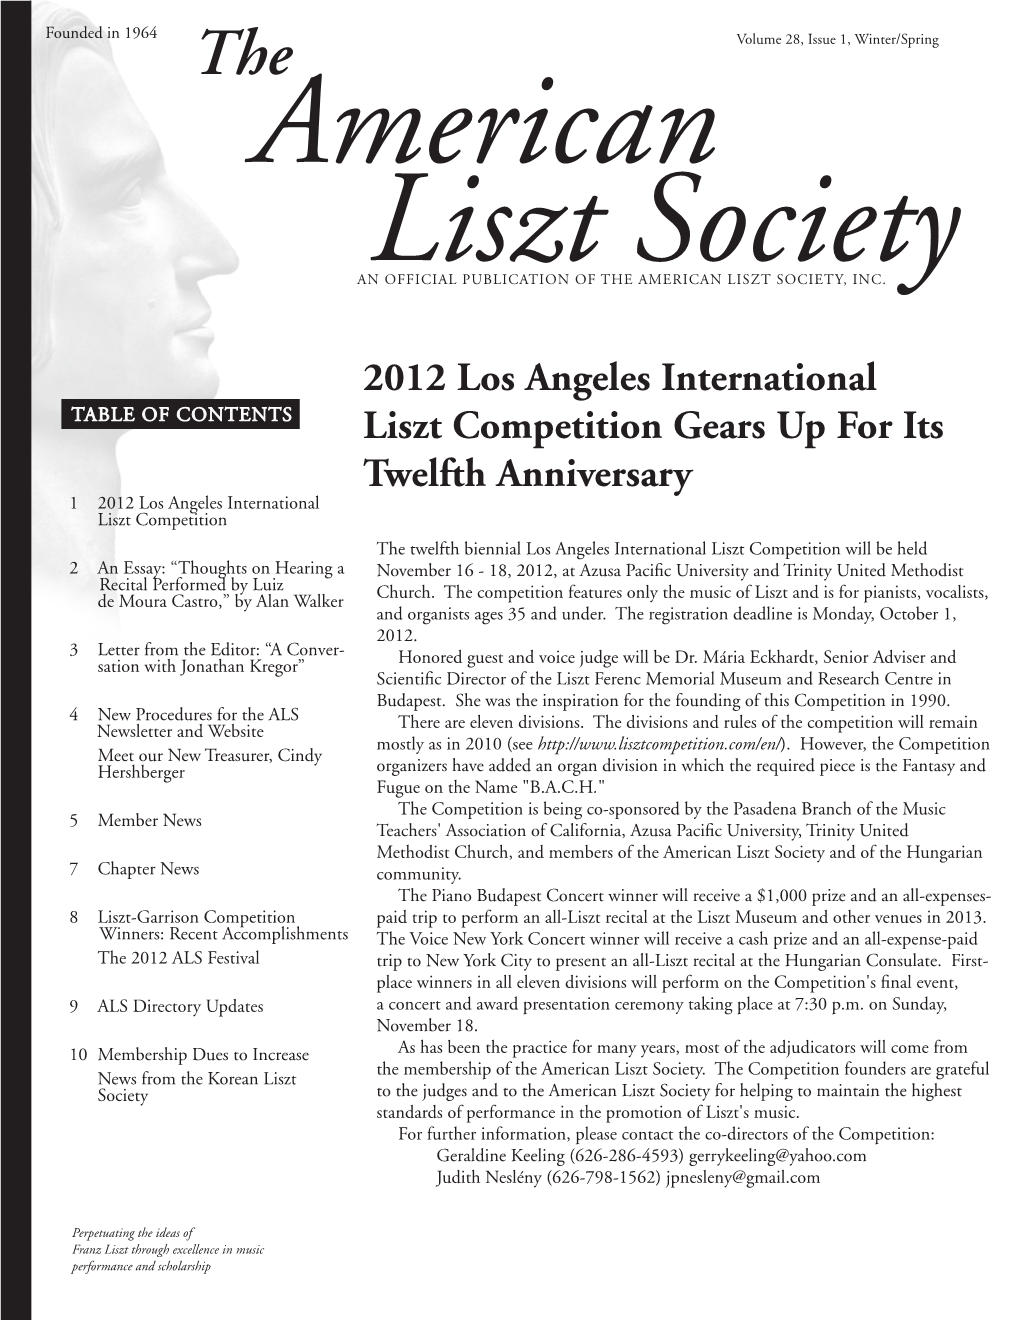 2012 Los Angeles International Liszt Competition Gears up for Its